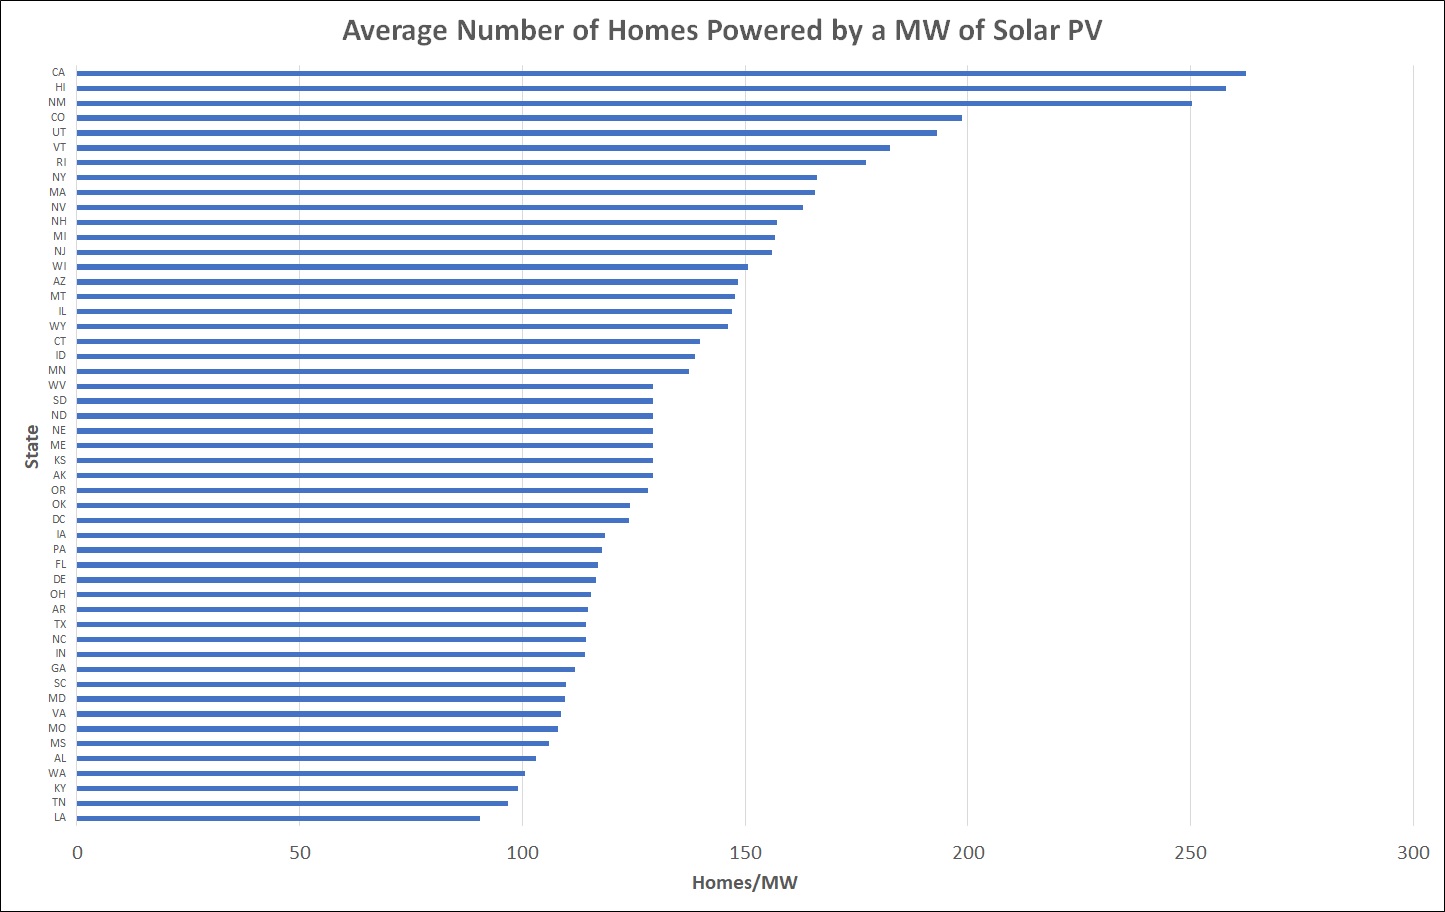 Average Number of Homes Power by Solar by State